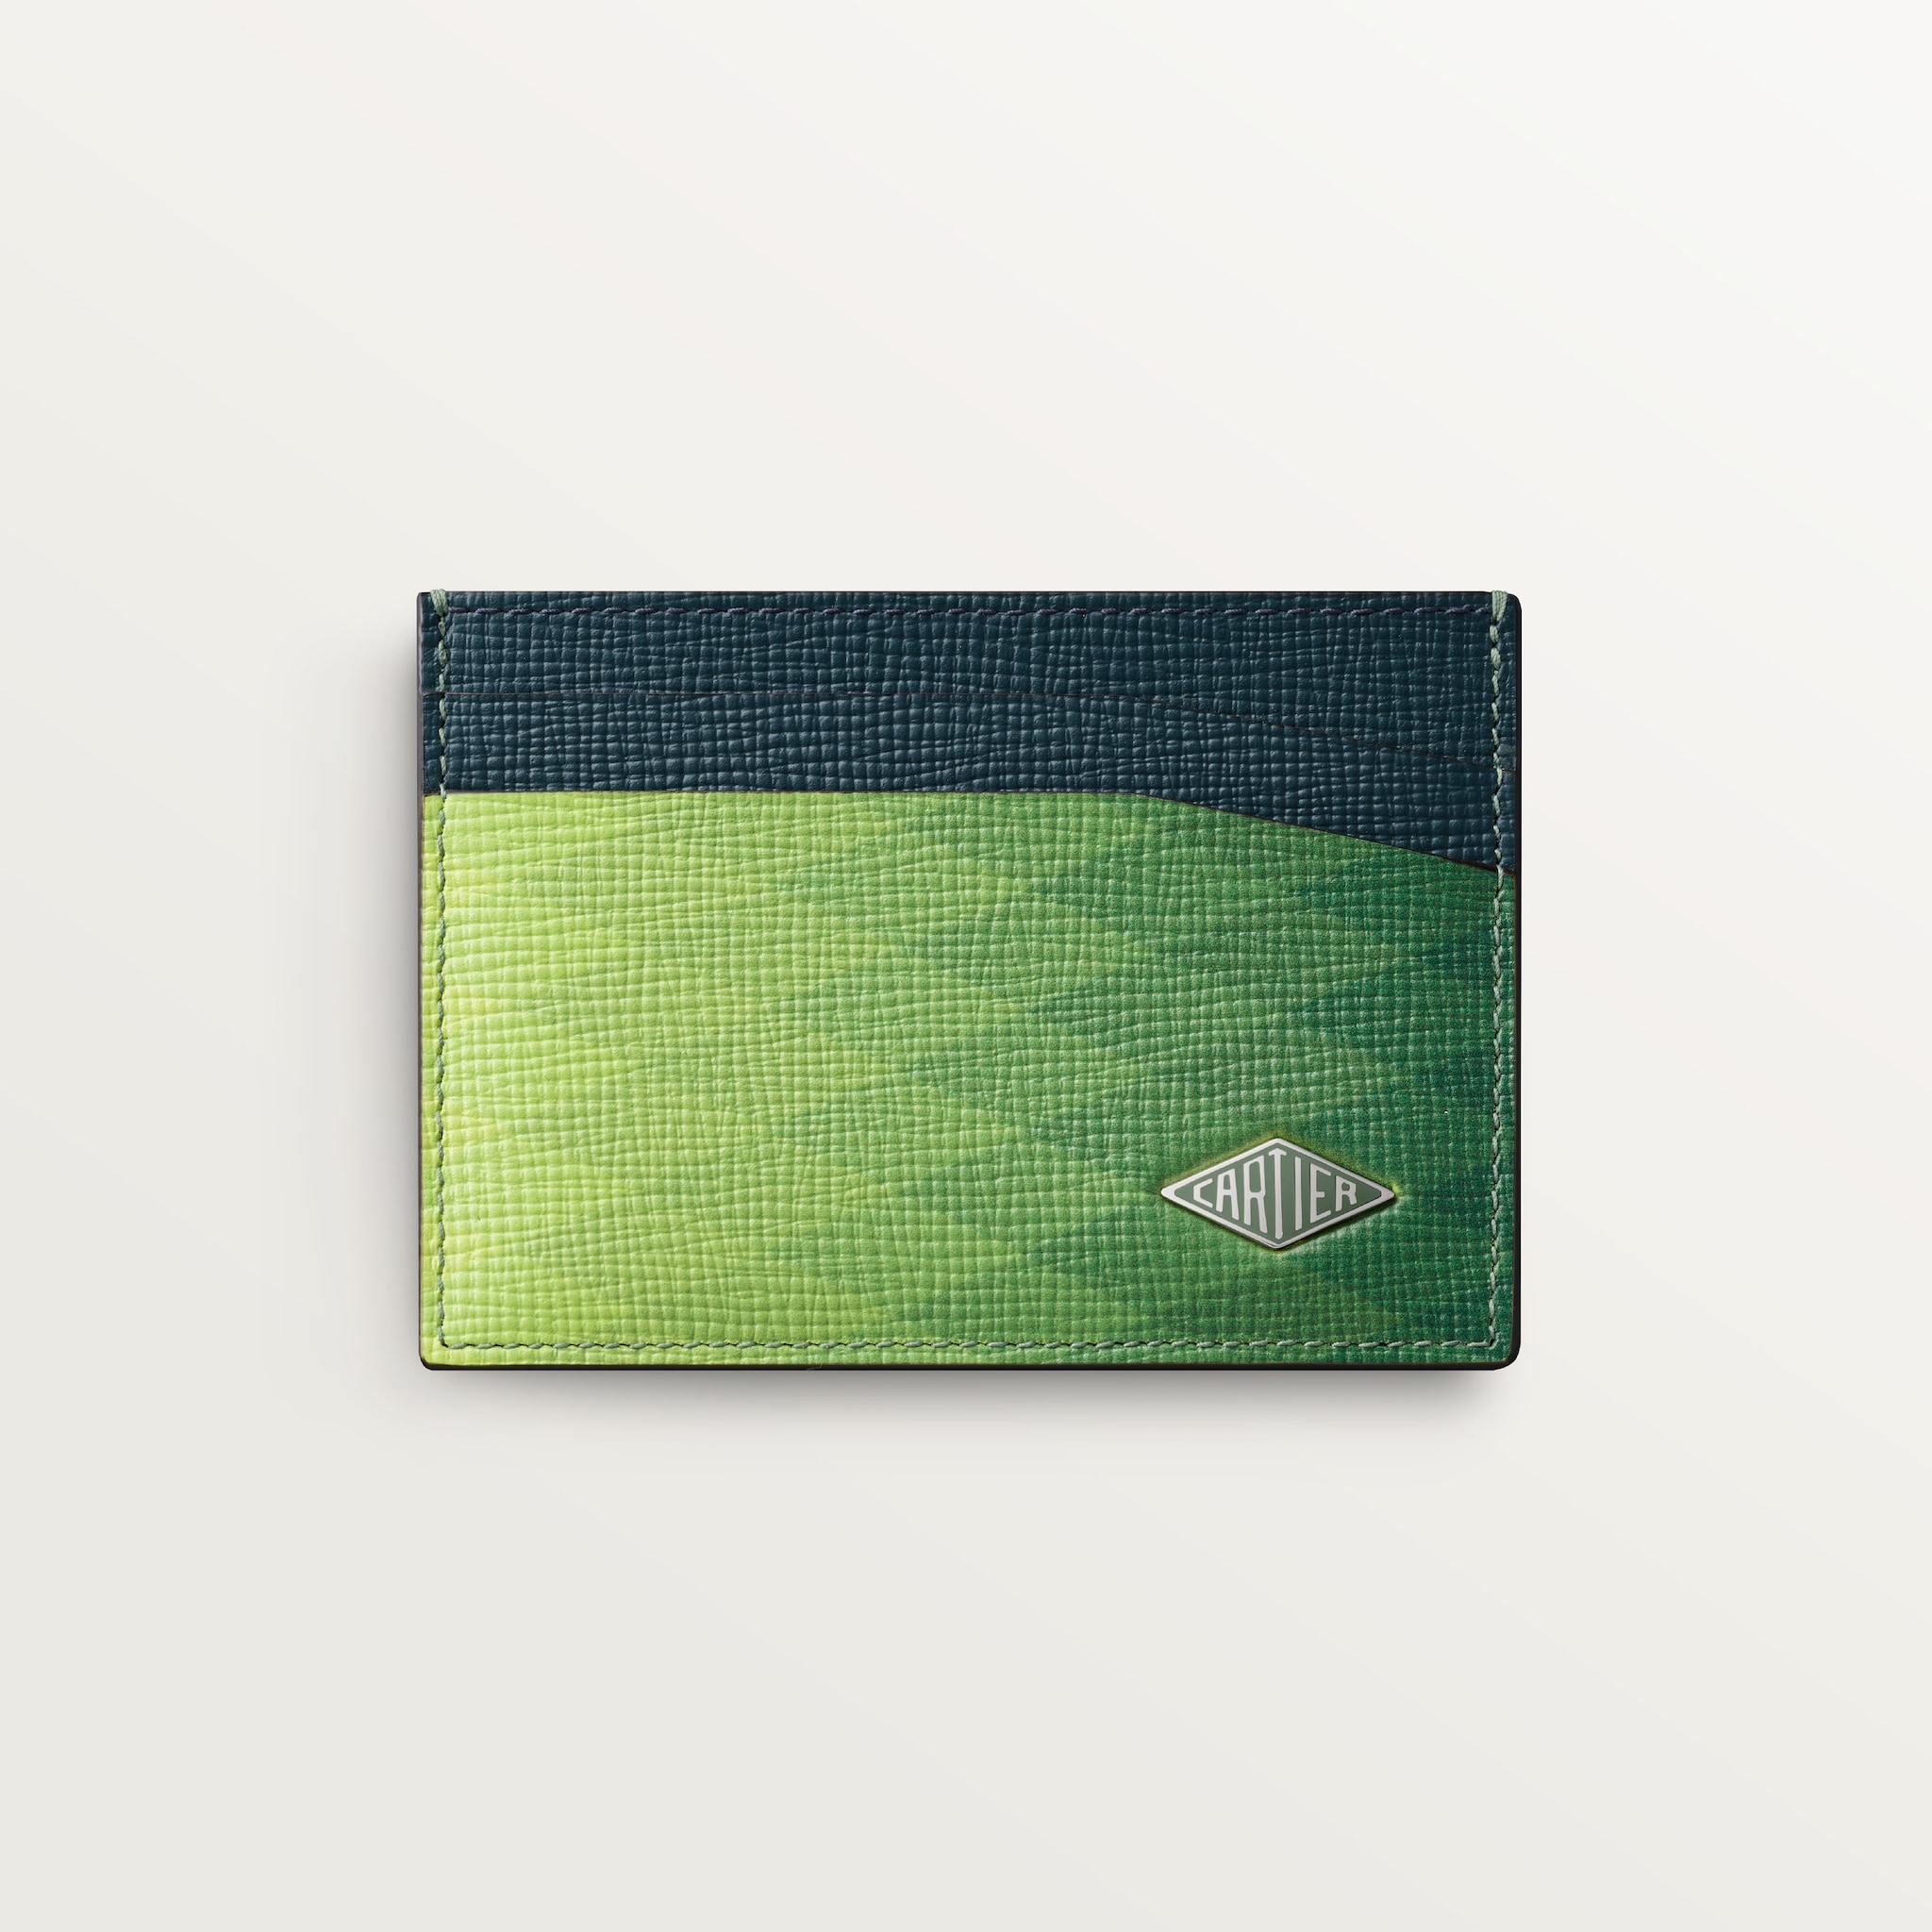 Double card holder, Cartier LosangeLime calfskin with prismatic print, palladium-plated finish and graphite enamel